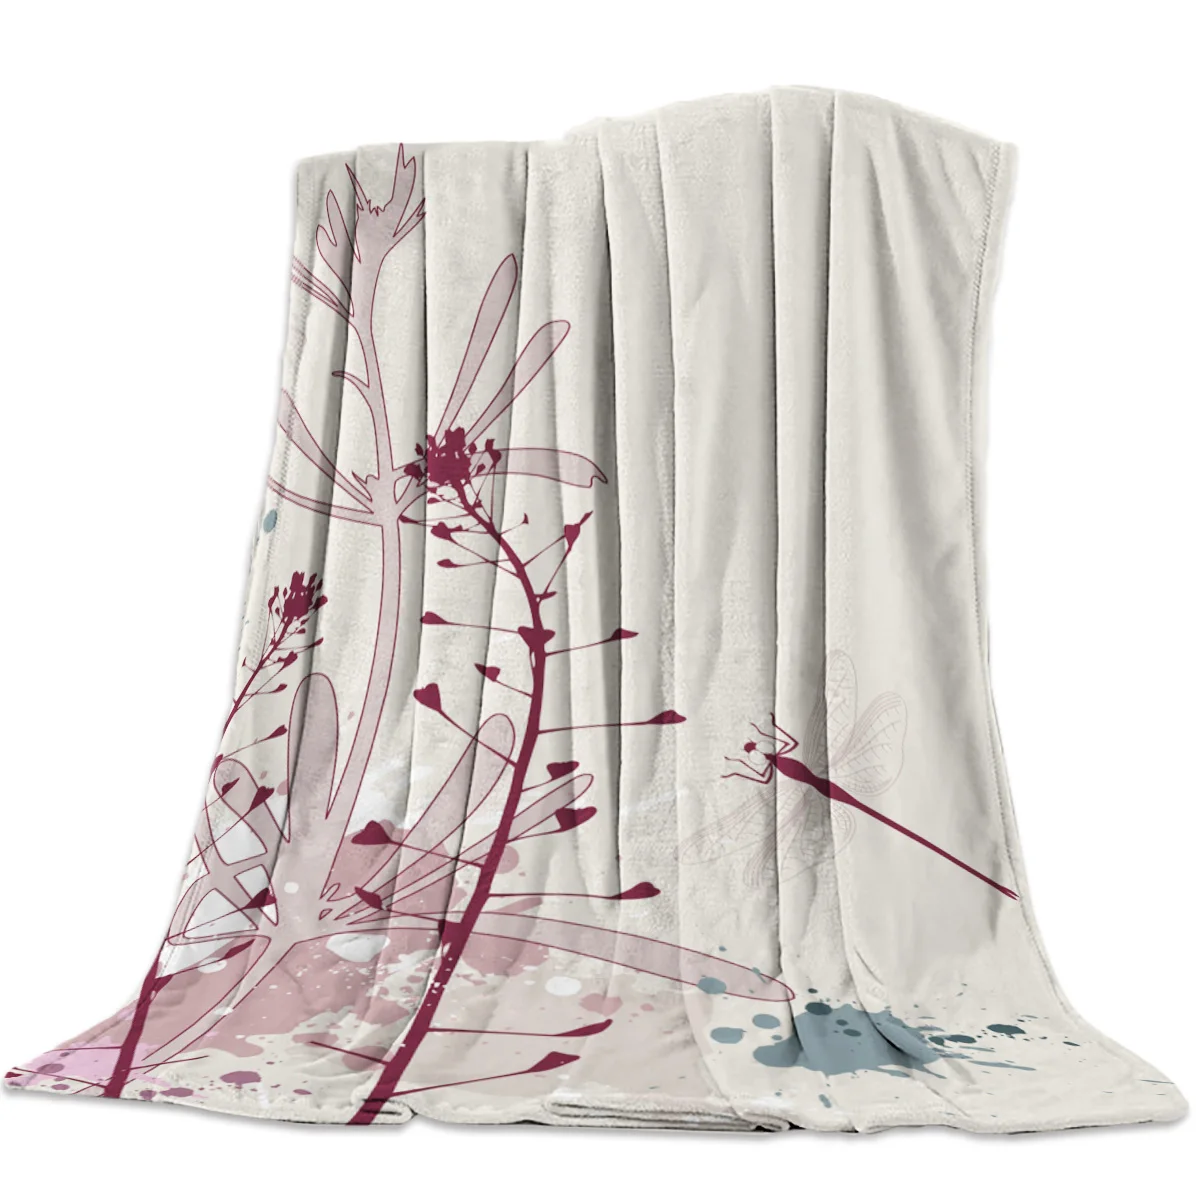 

Dragonfly Wings Ink Love Is A Natural Angel On Bedspread Blankets Coverlet Throws Throw Cover Wrap Hypoallergenic Your Shoulder